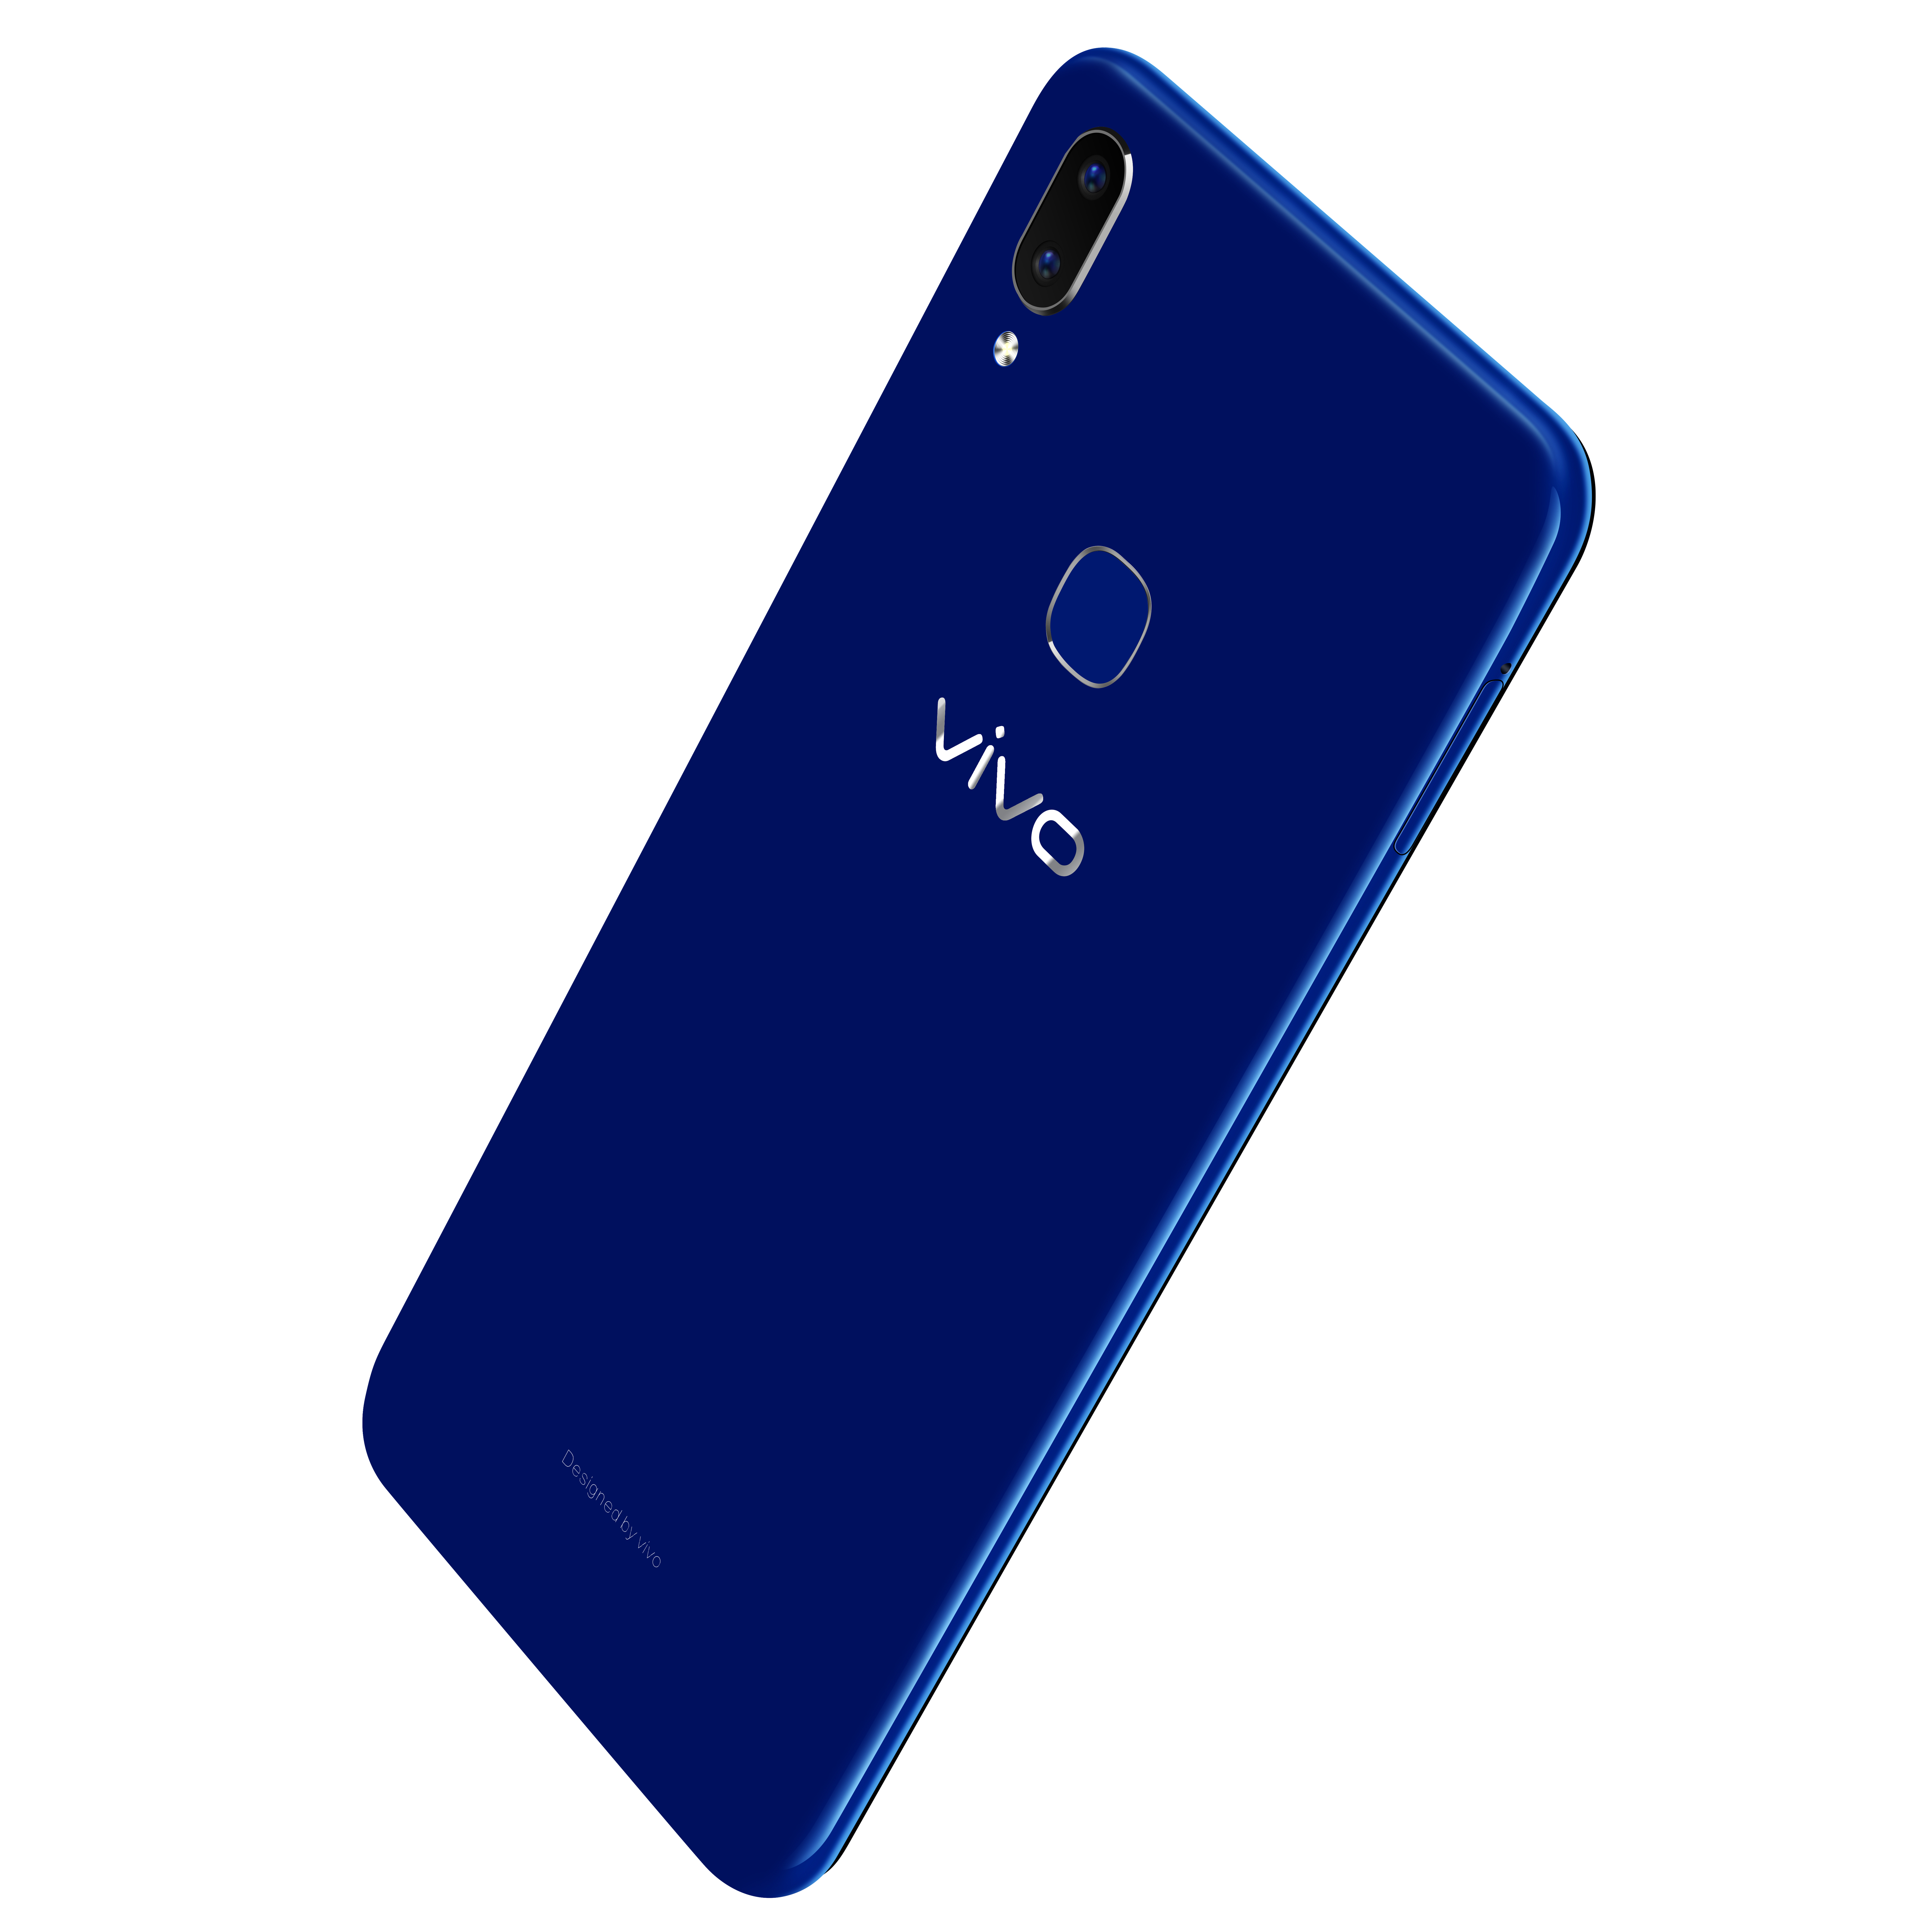 Vivo V9 Now Available in Sapphire Blue 3